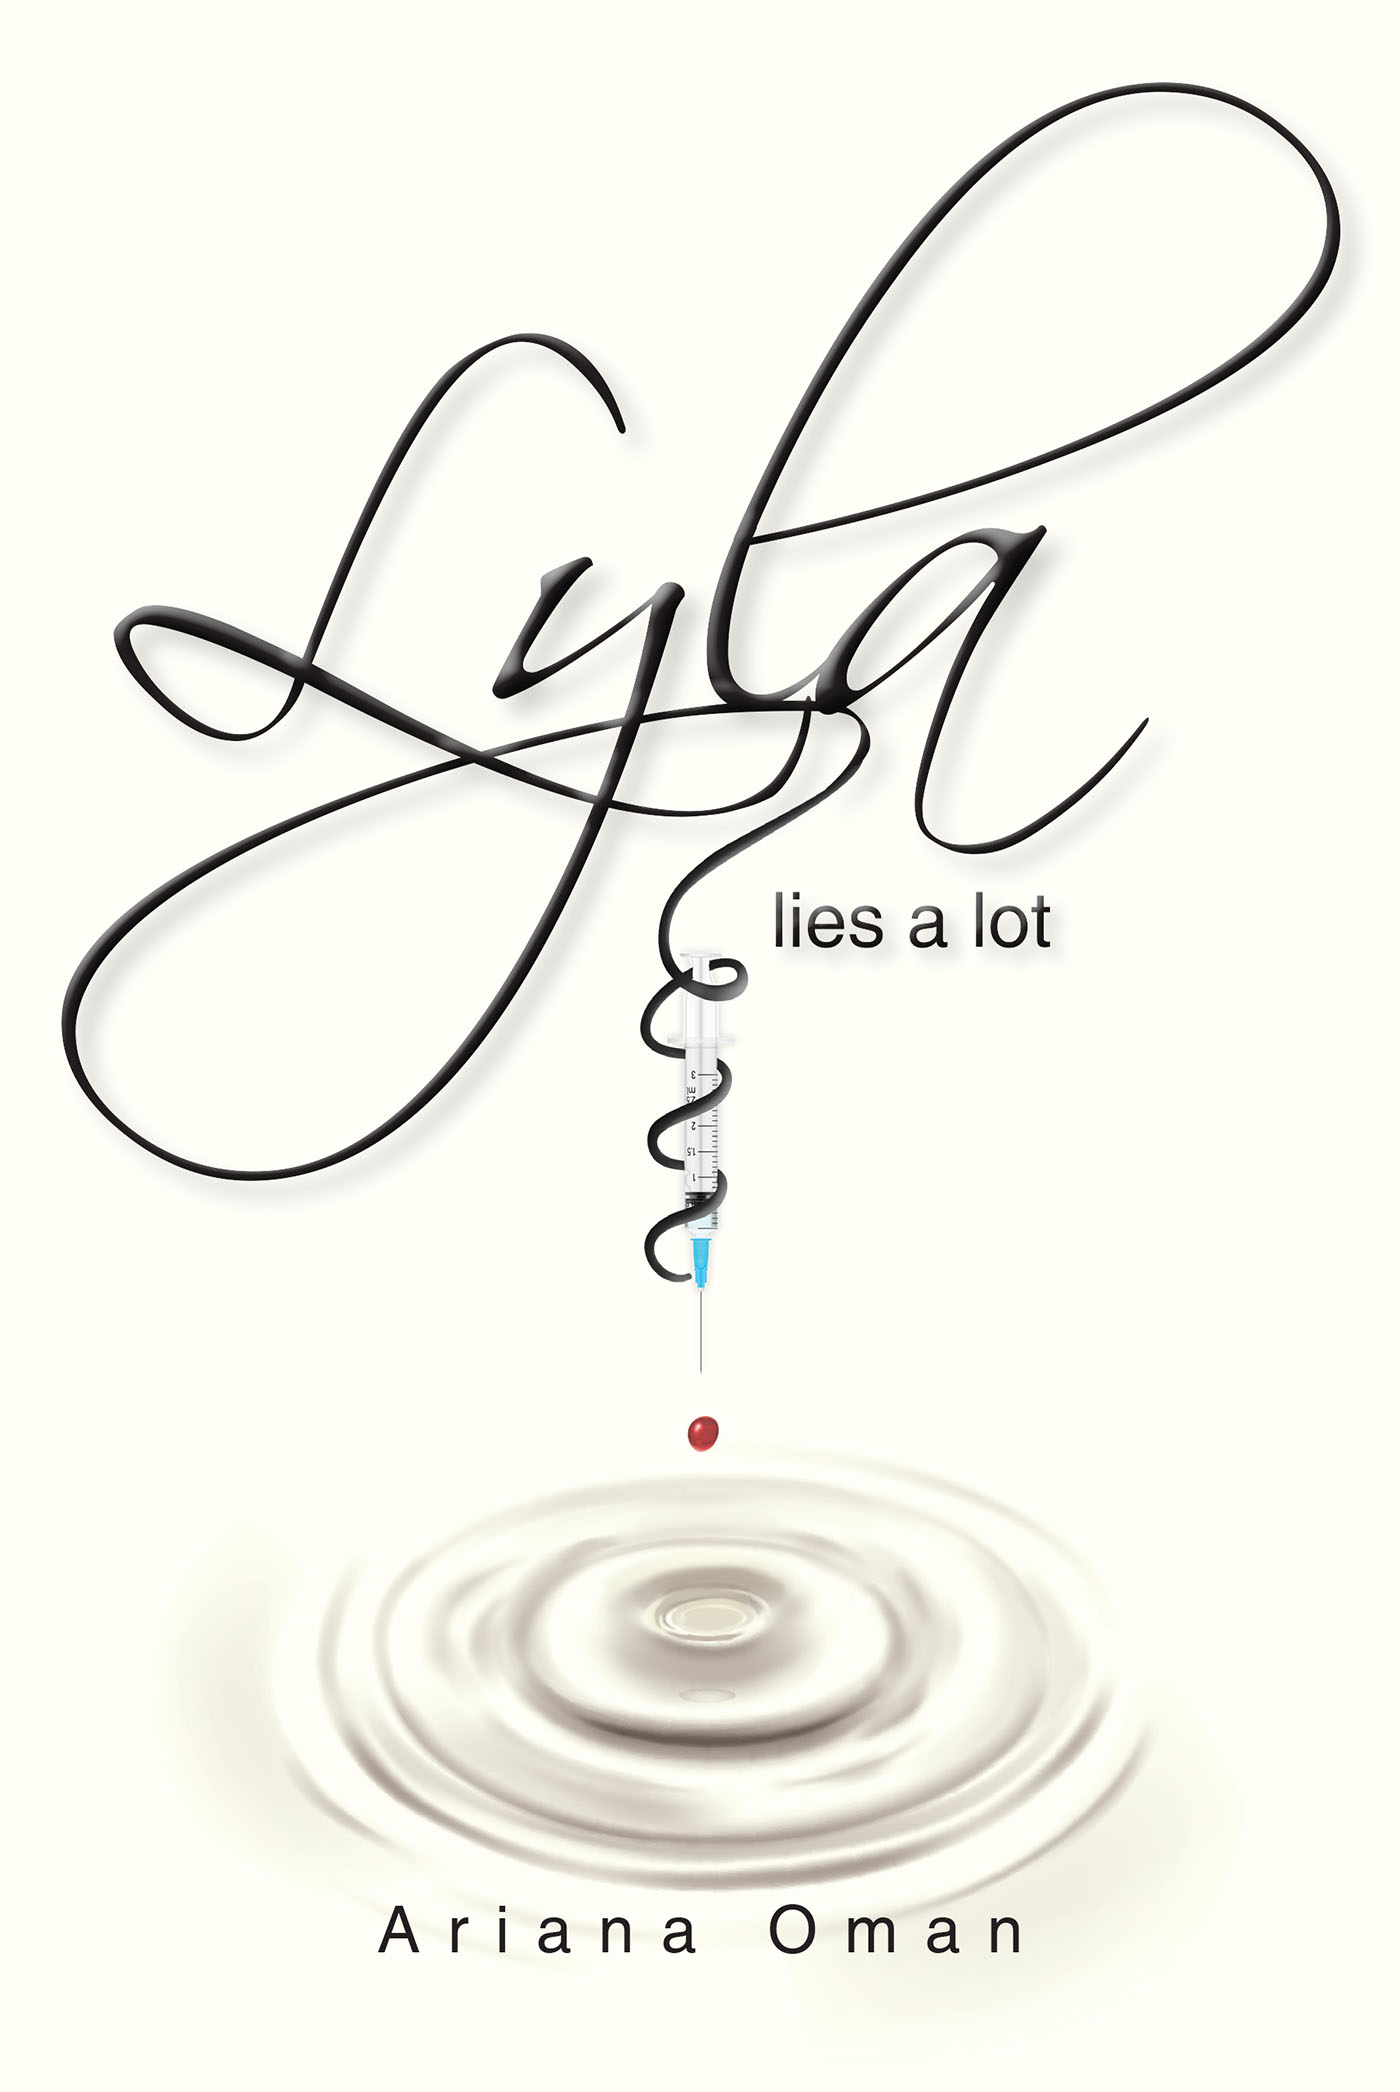 Ariana Oman’s Book, "Lyla Lies A Lot," Reveals How Lies from a Twisted Mind Reverberate Then Obliterate a Marriage, Tear Apart Lives, & Jeopardize an Innocent Boy’s Life